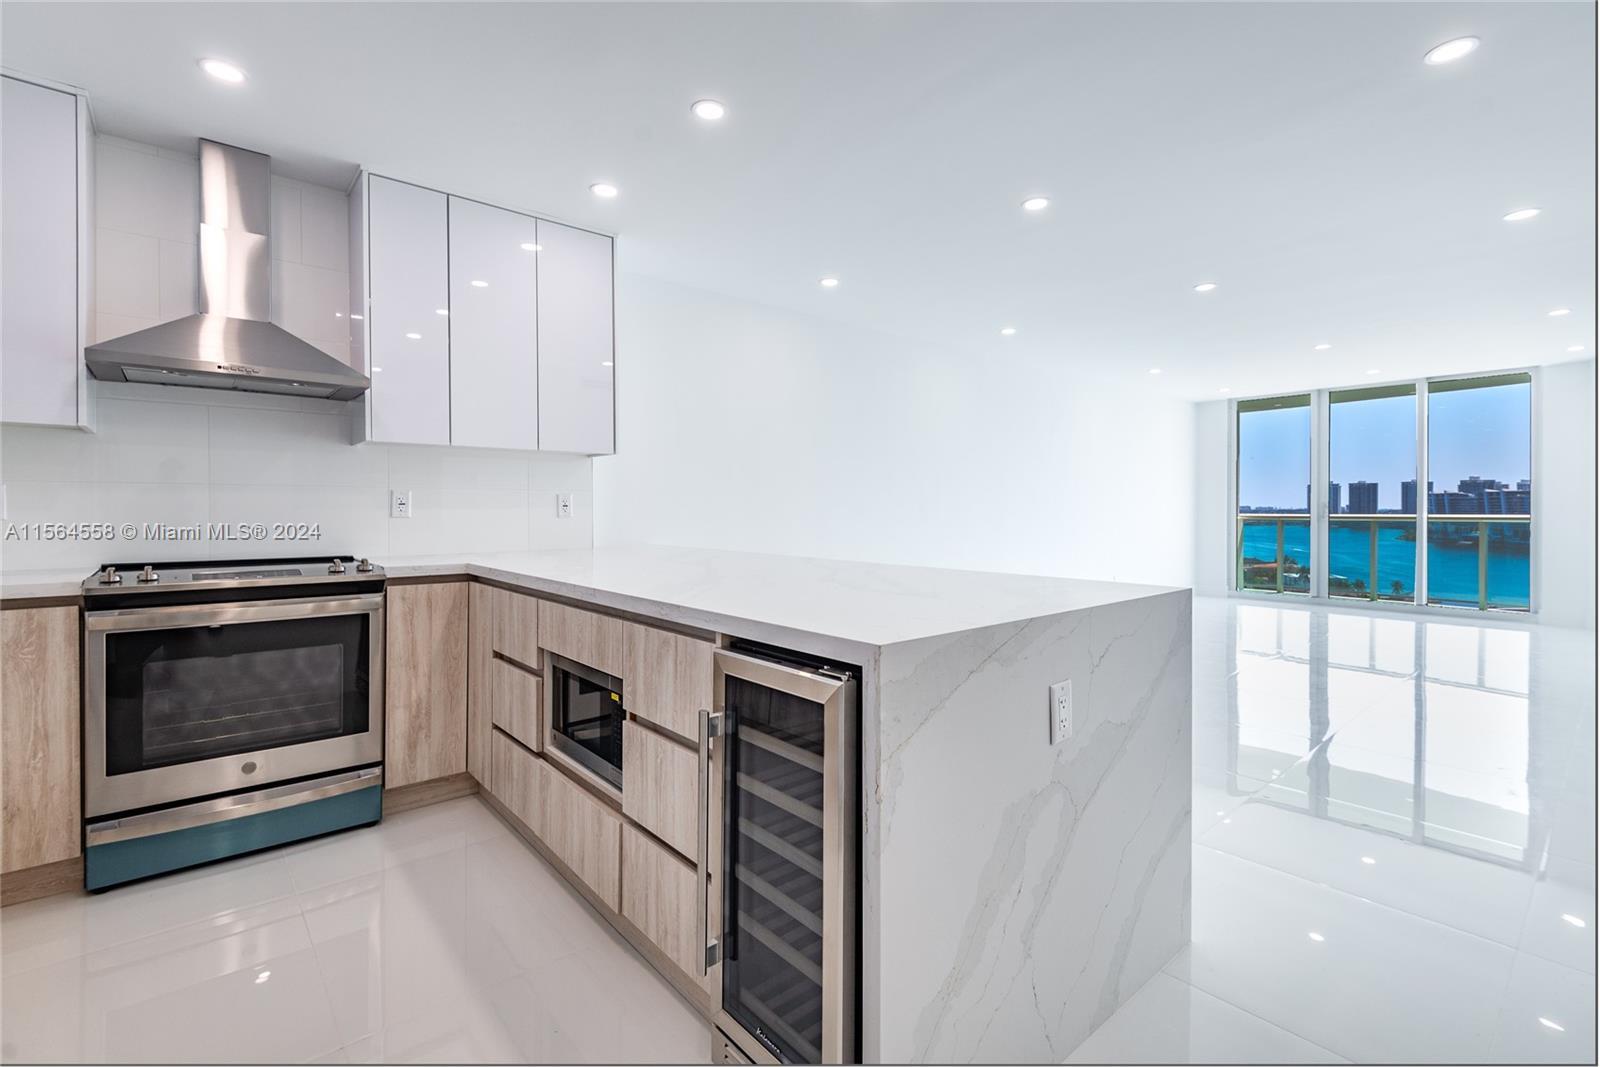 Experience luxury living in the prestigious Ocean View building in Sunny Isles Beach! This stunning 